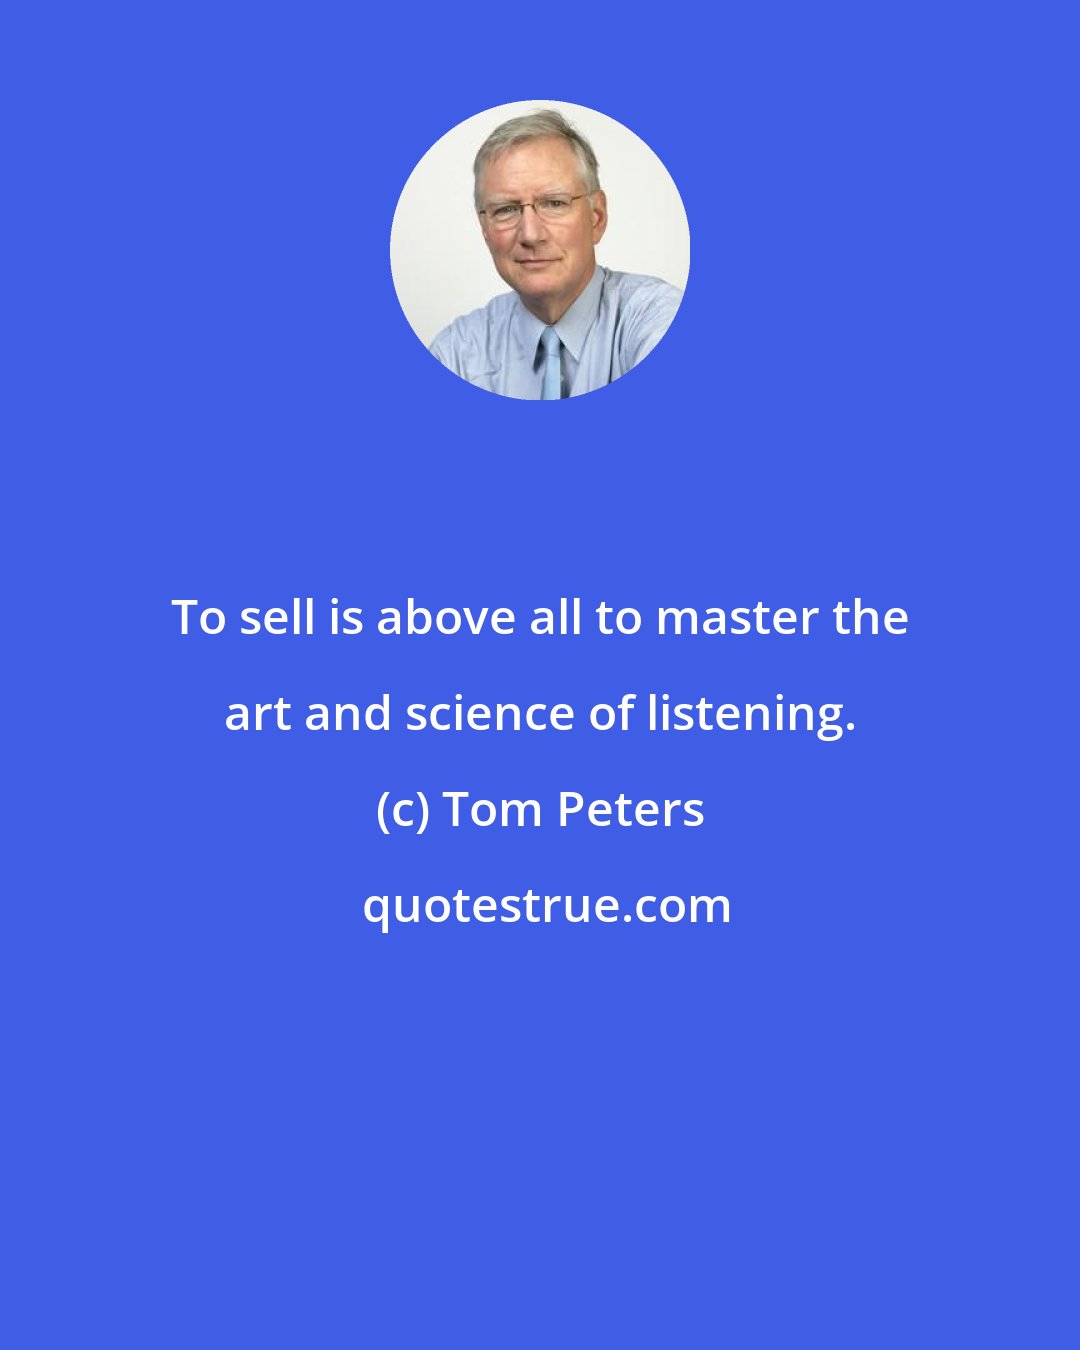 Tom Peters: To sell is above all to master the art and science of listening.